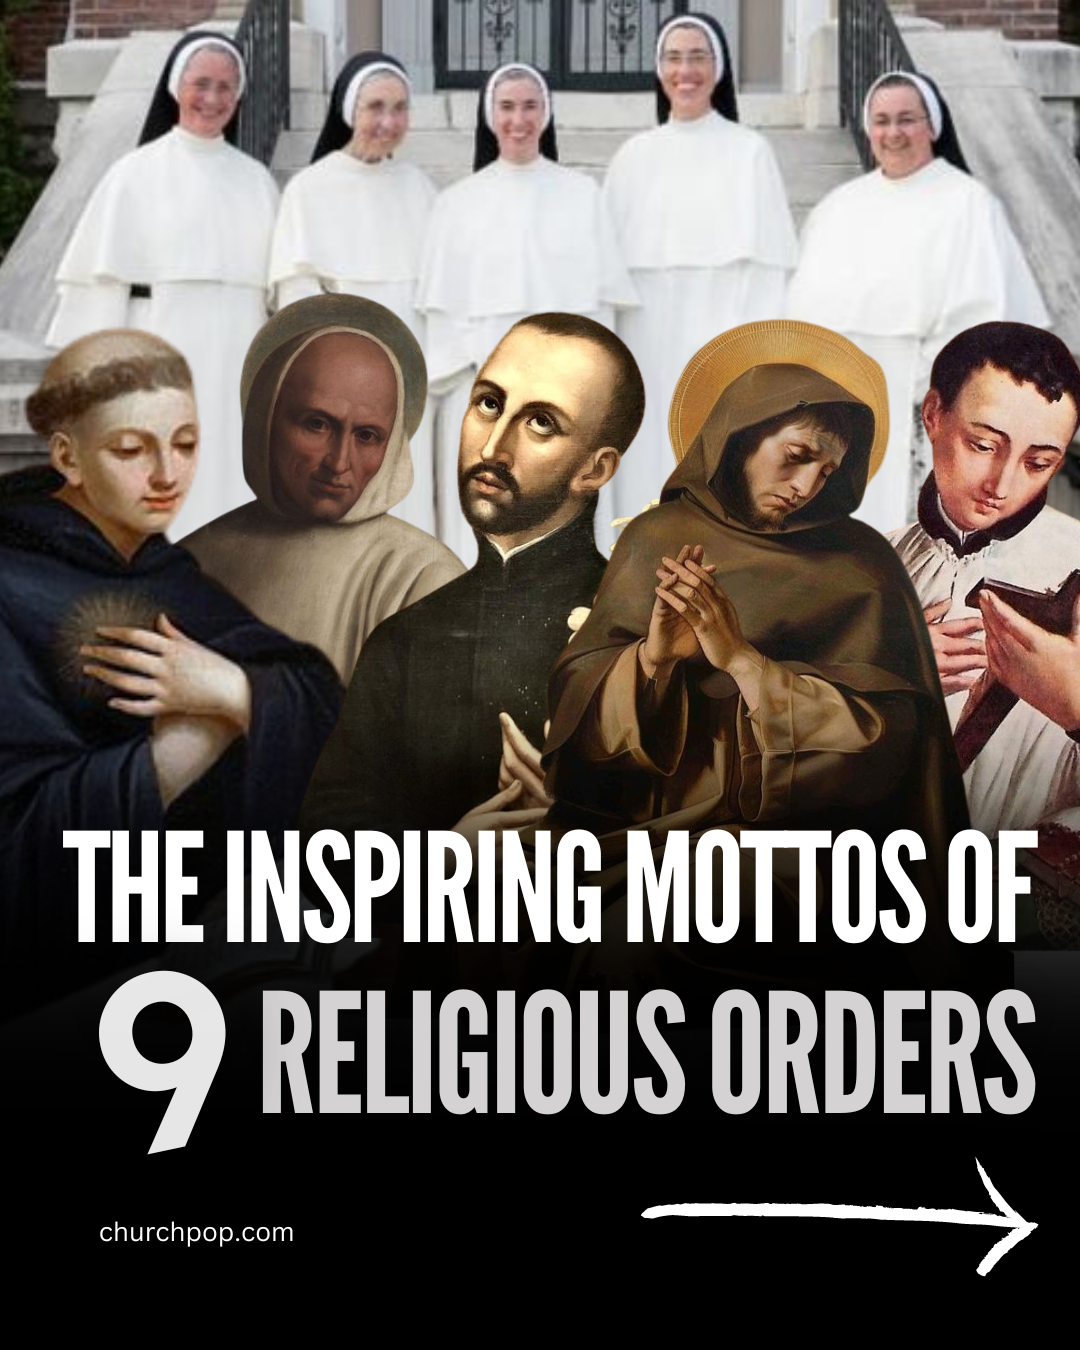 jesuit meaning, benedictine, augustinian, dominican, franciscan, carmelite